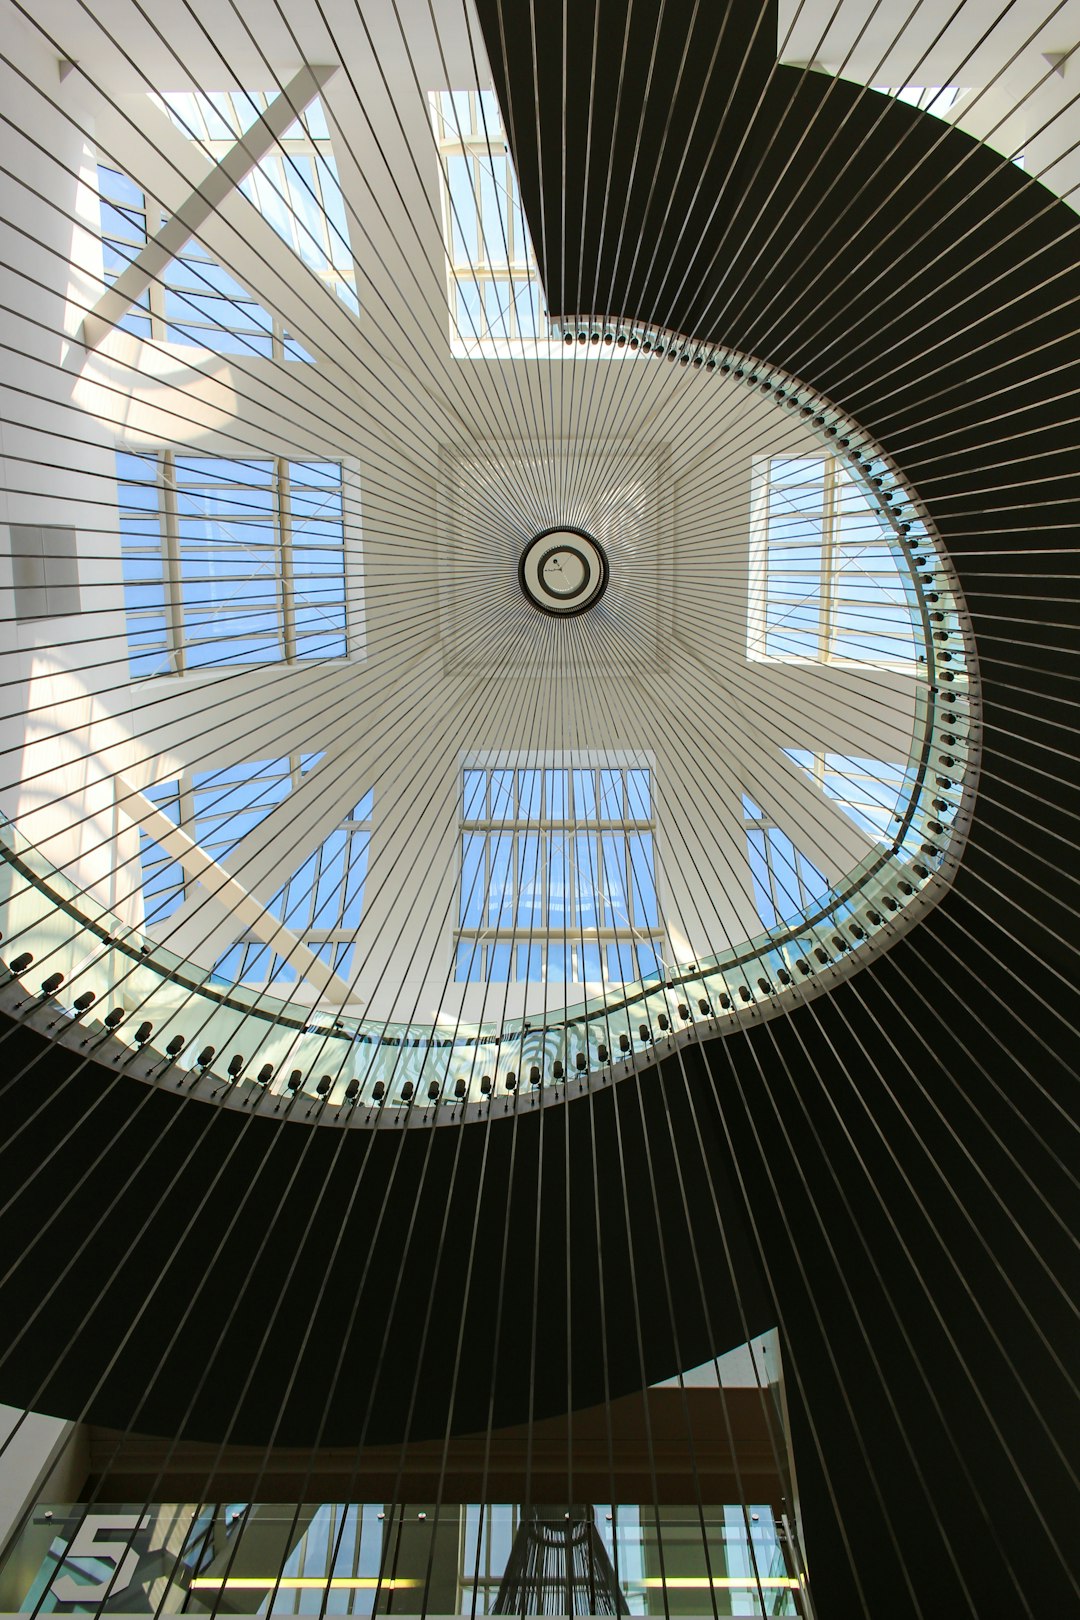 View from the ground floor